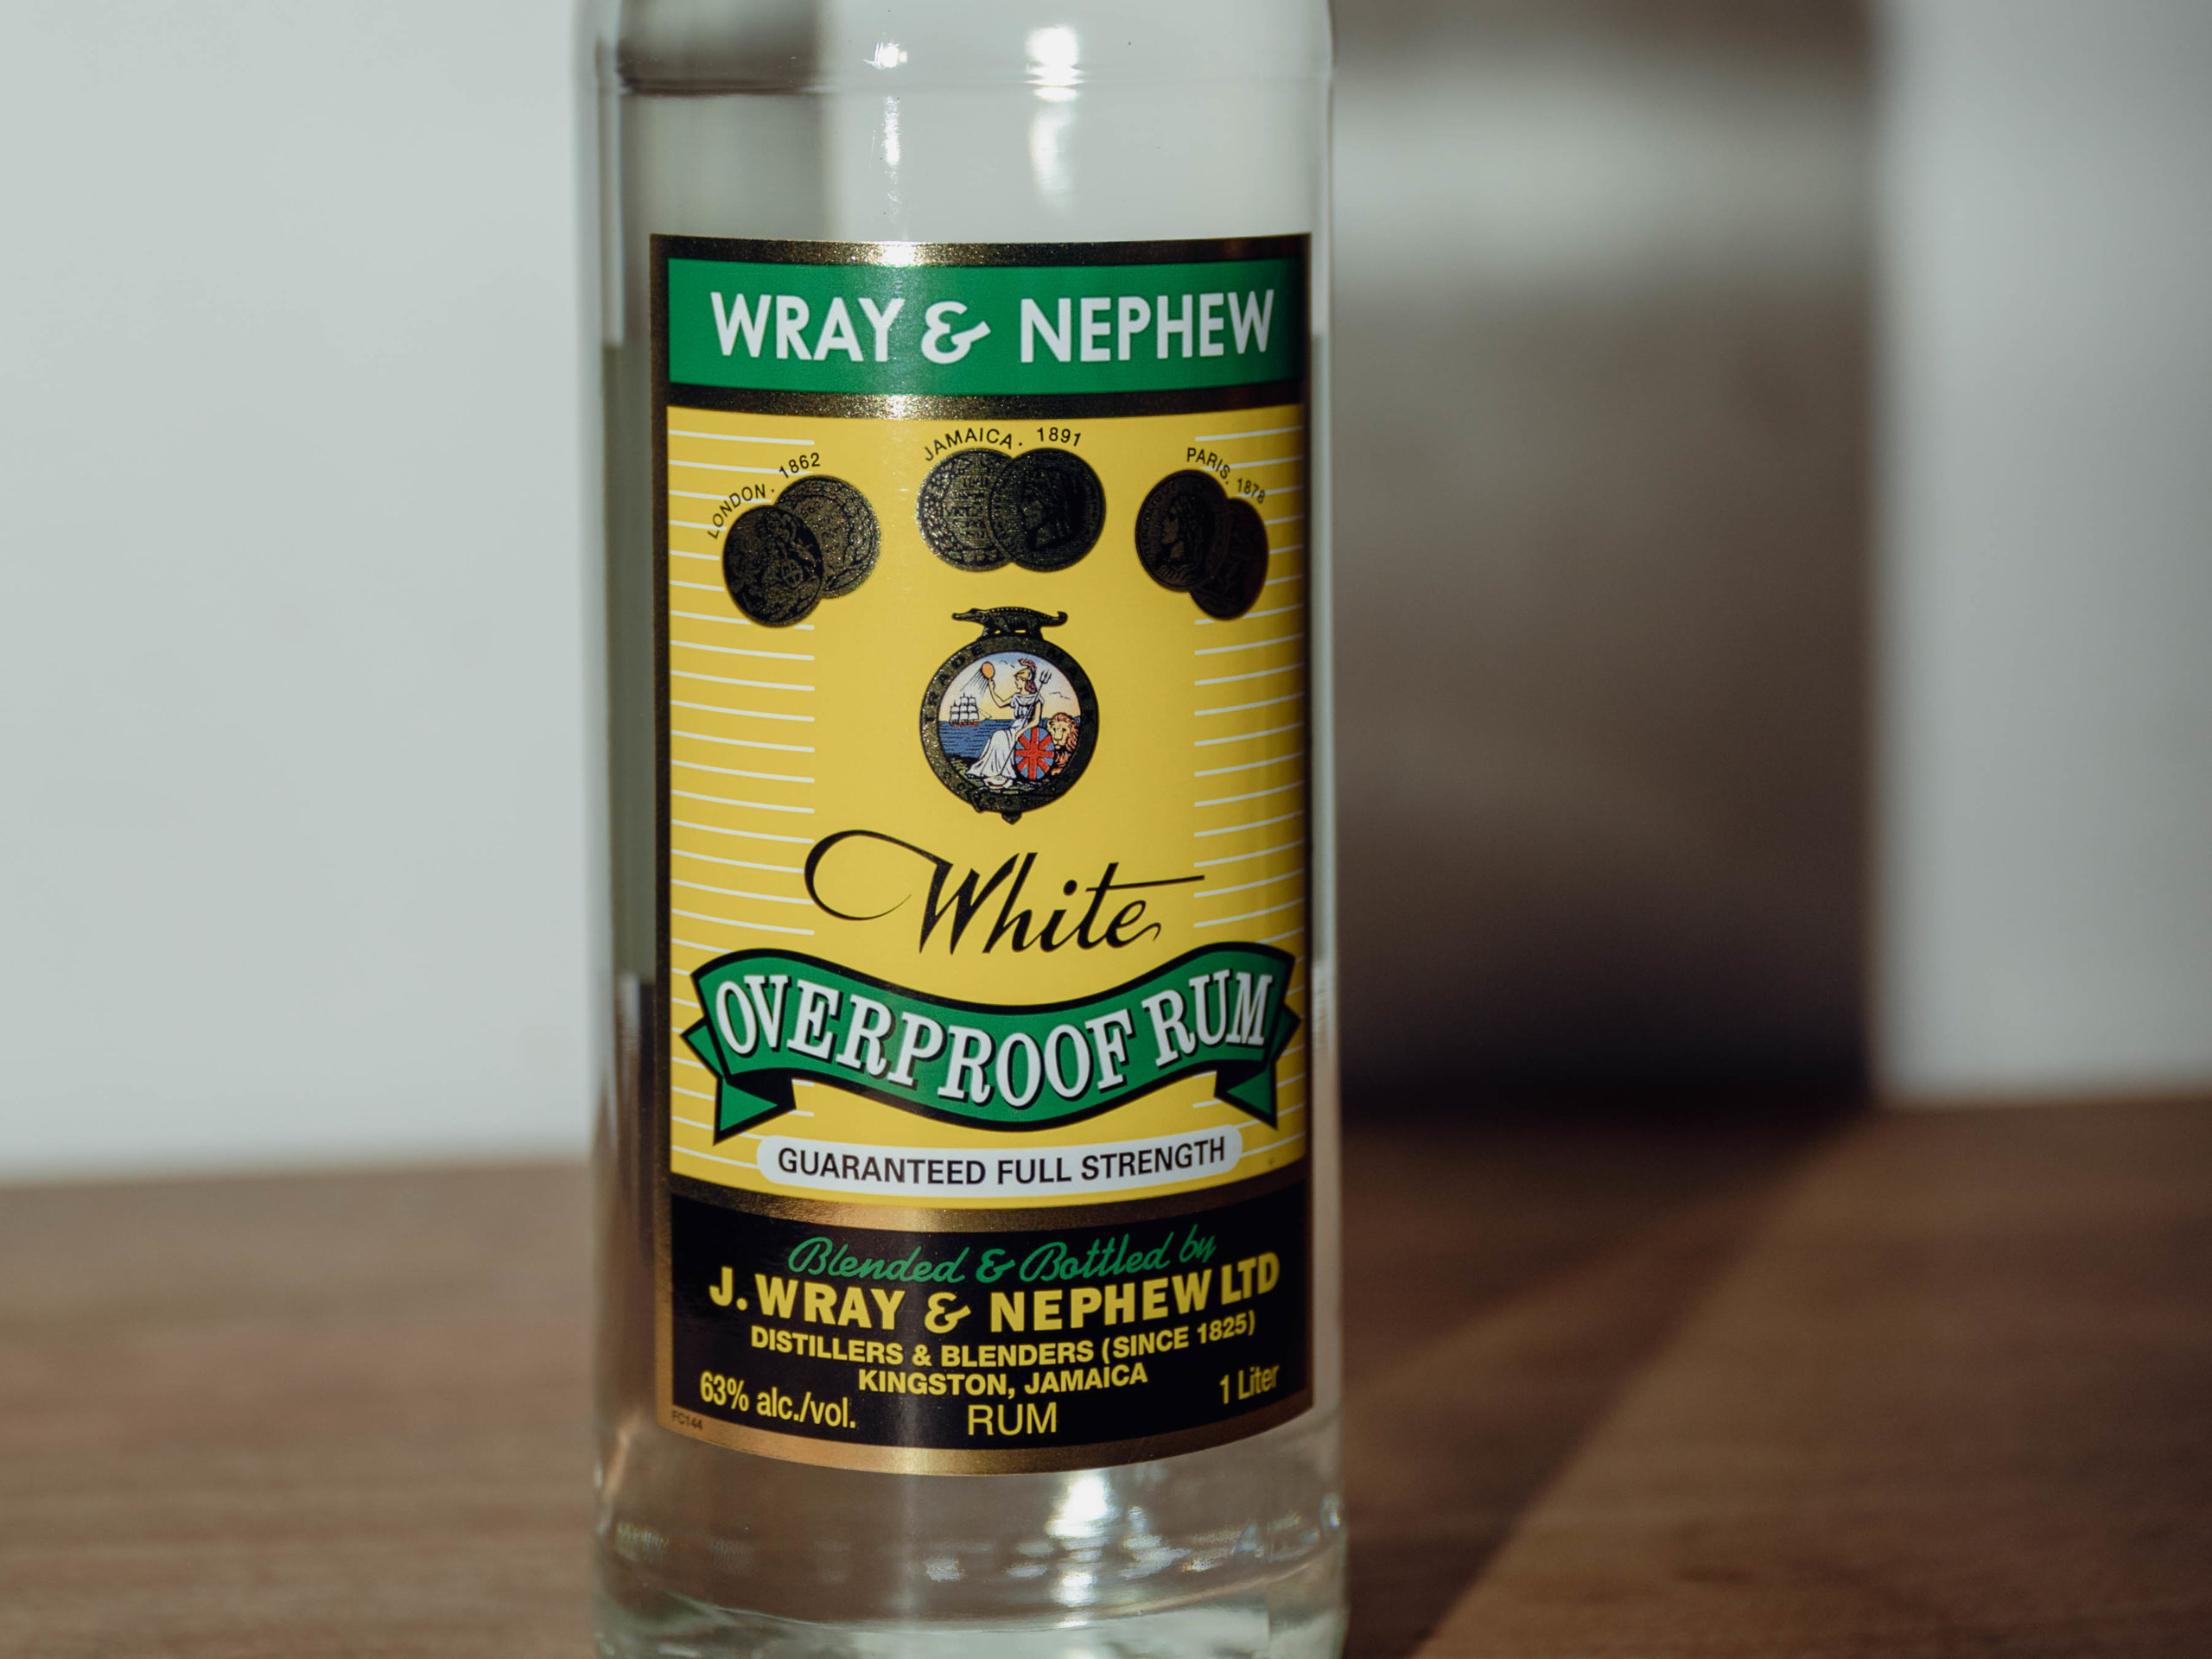 Wray and Nephew Rum: The Popular Jamaican Rum That Wards Off Evil